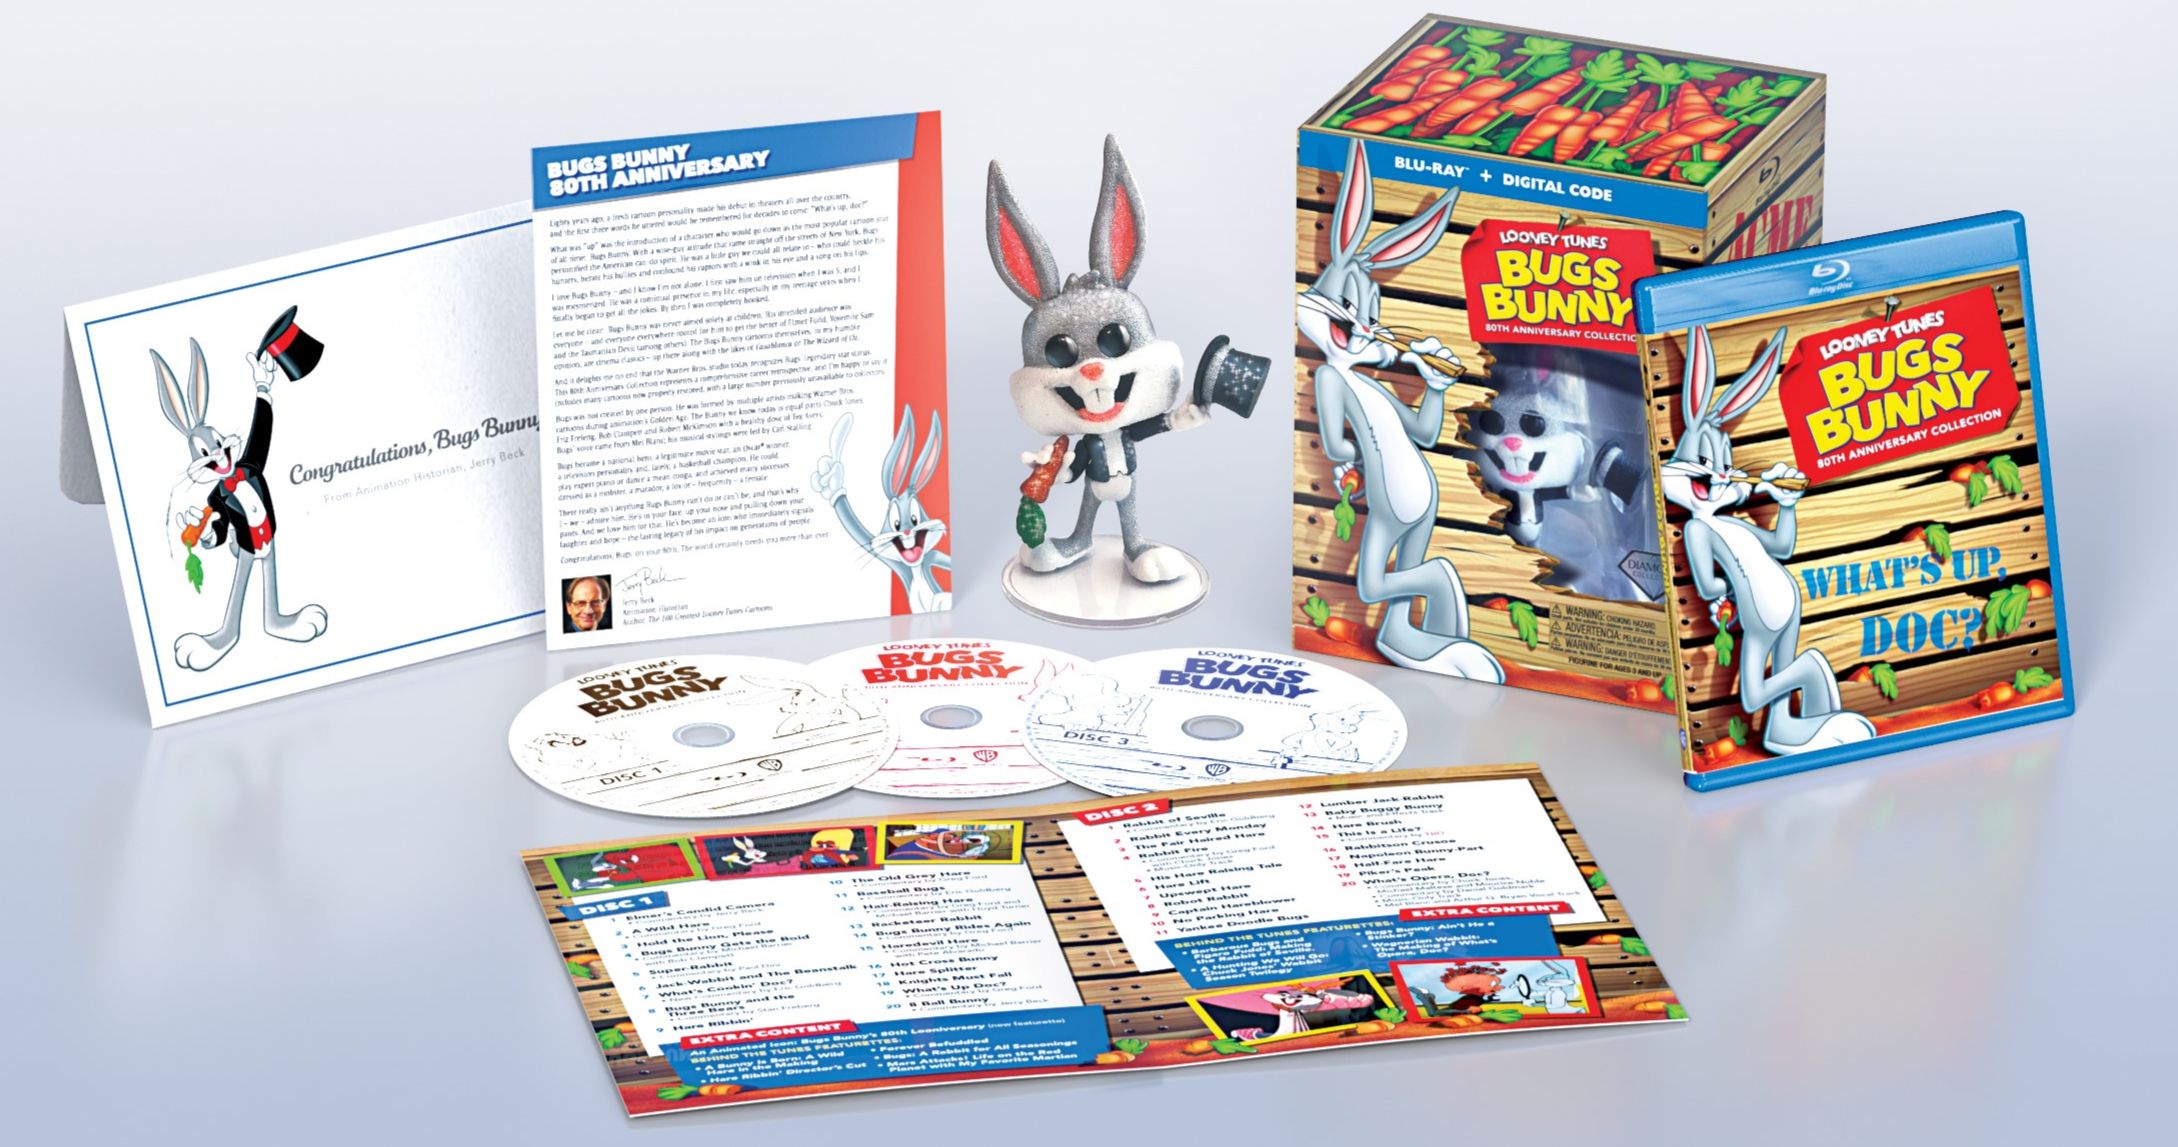 Bugs Bunny 80th Anniversary Collection Coming This Fall with 60 Original Theatrical Shorts